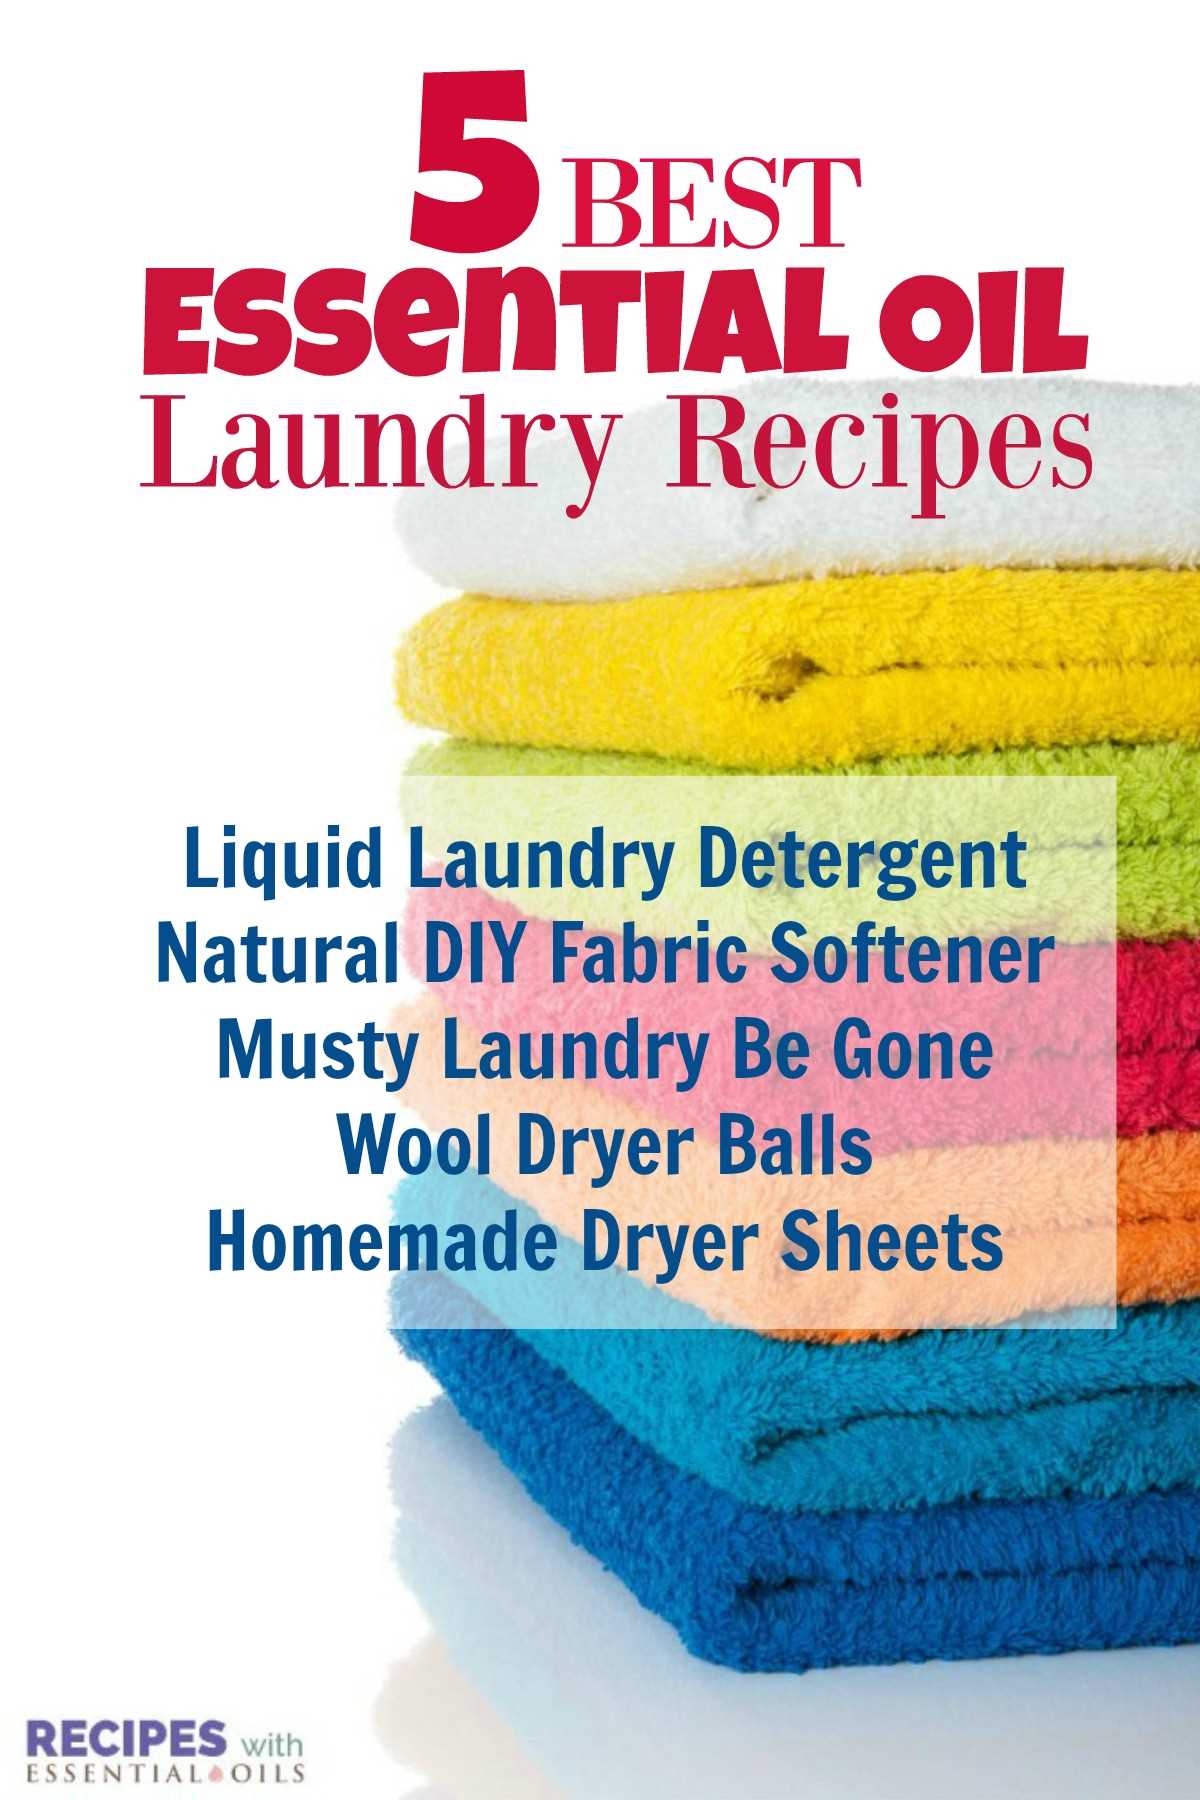 Enhancing Your Laundry with Essential Oils and Dryer Balls